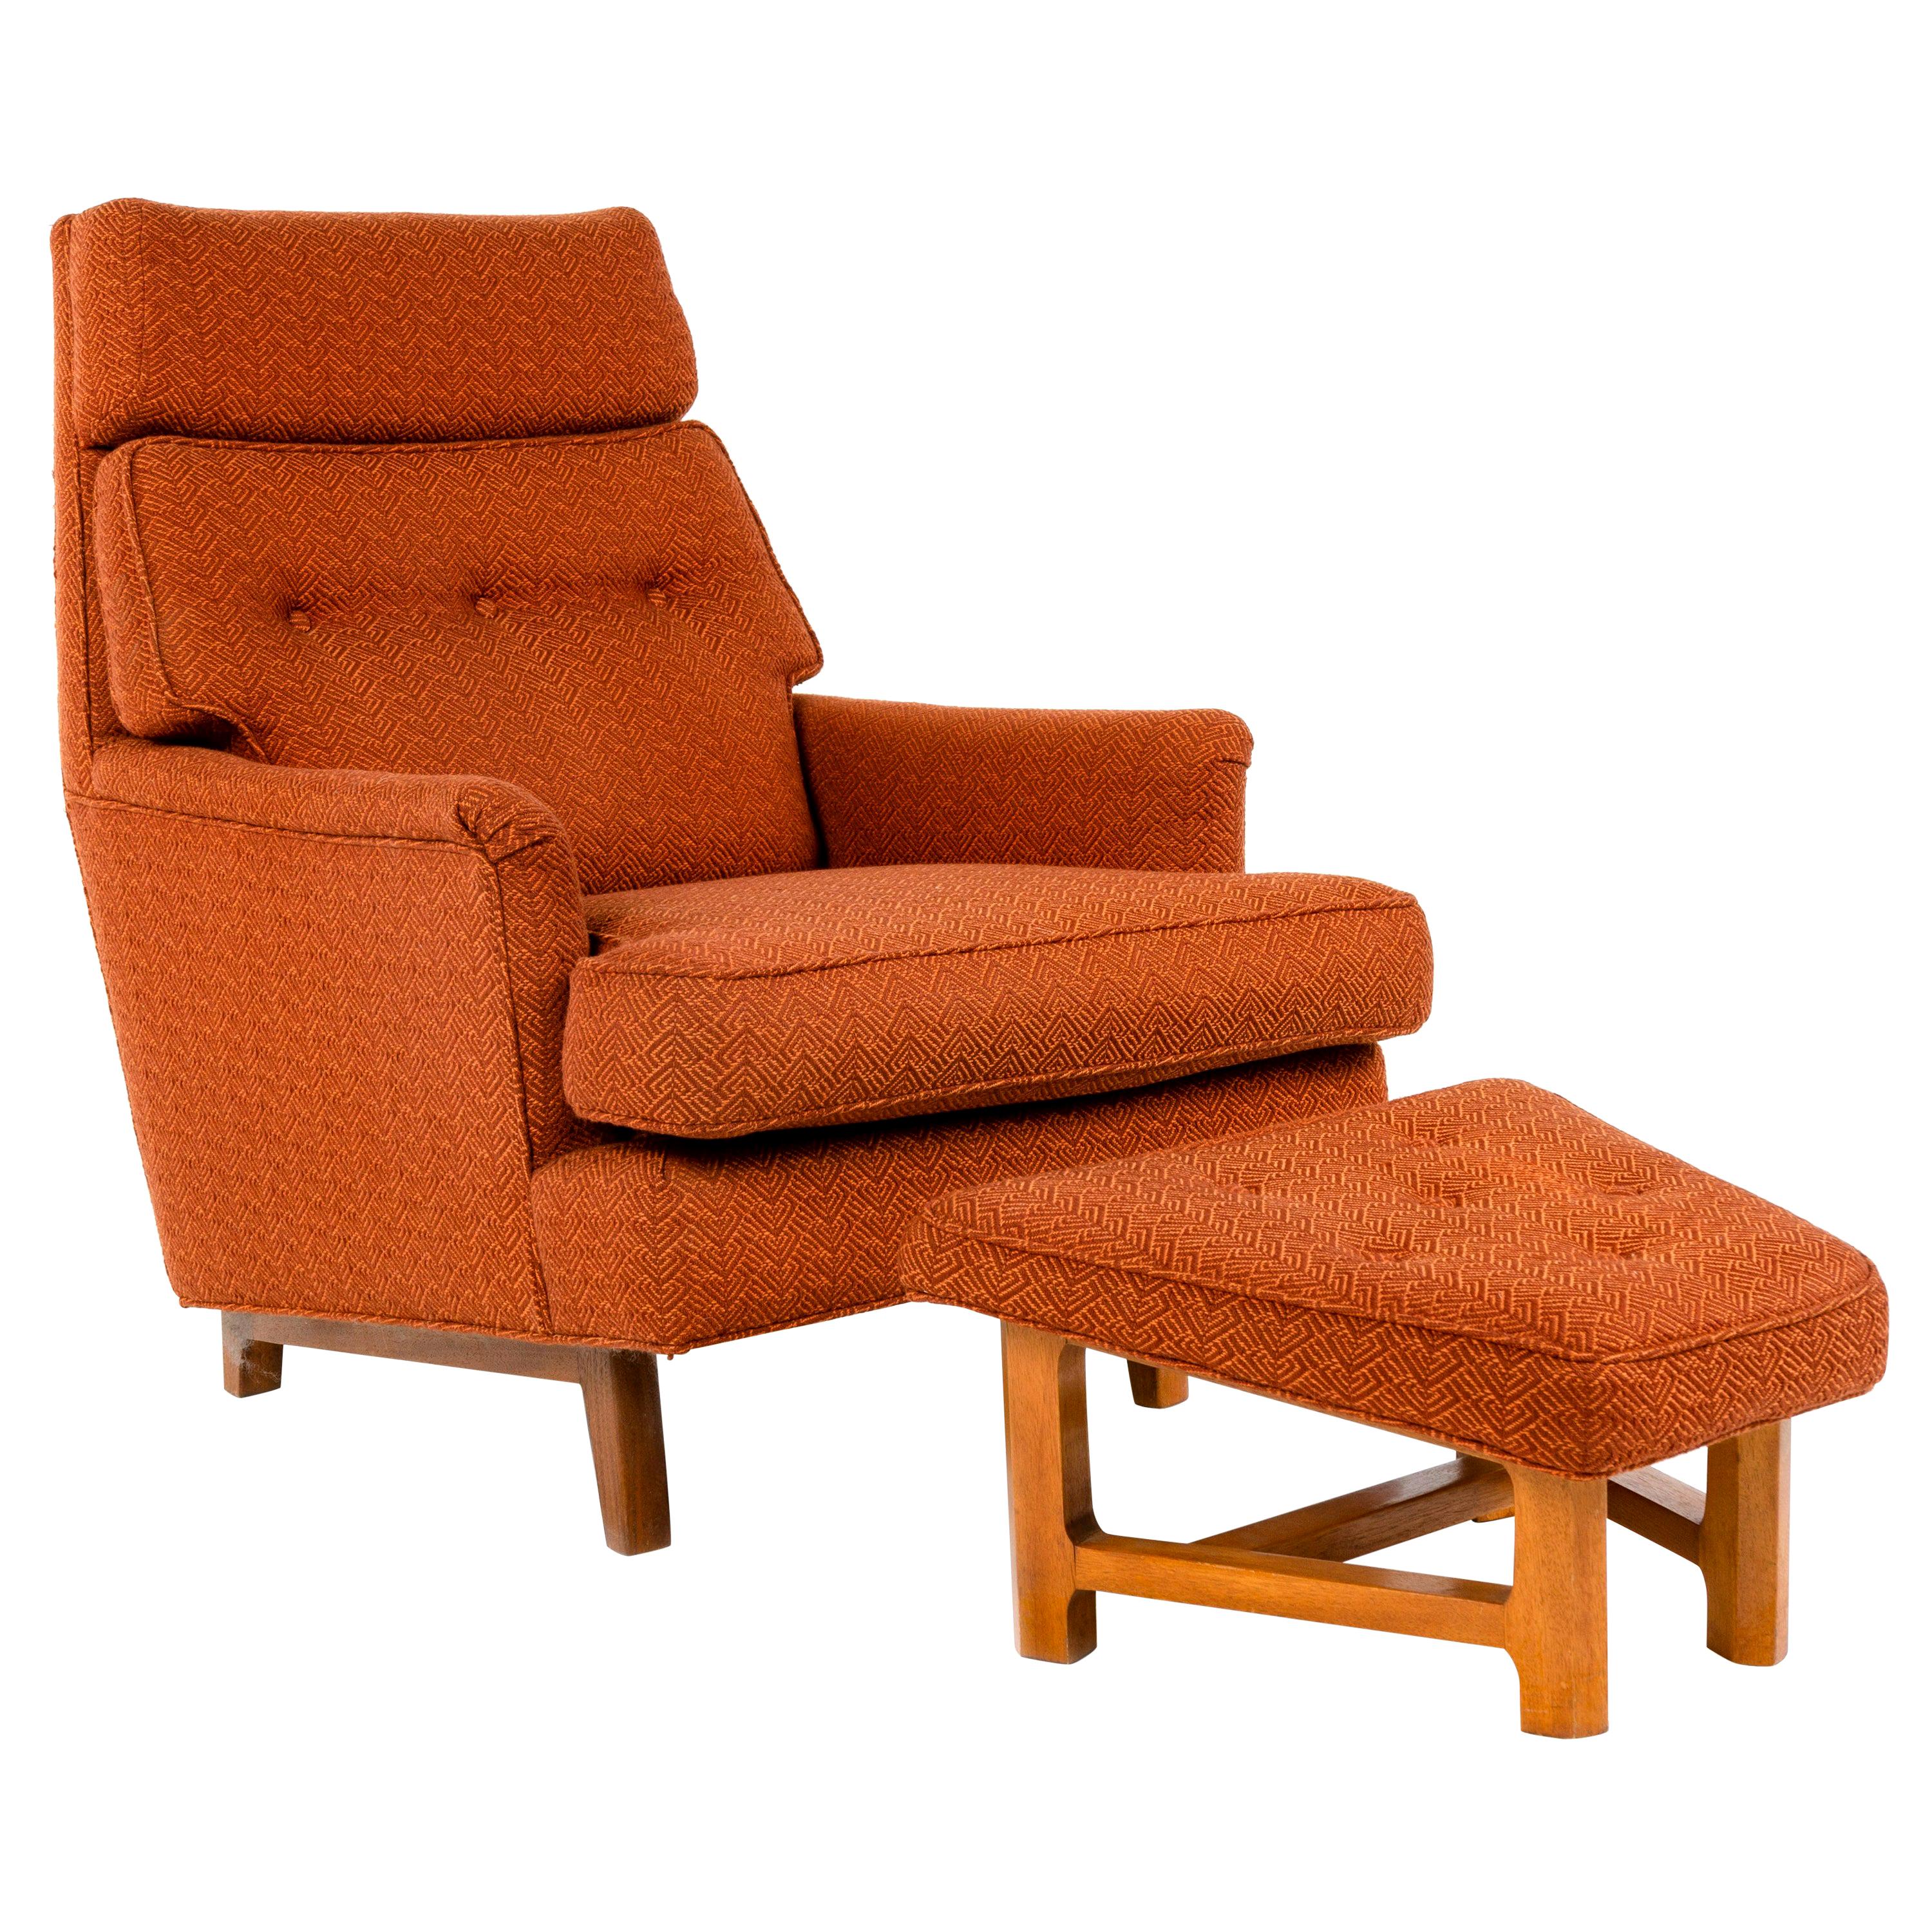 1950s Lounge Chair and Ottoman by Edward Wormley for Dunbar